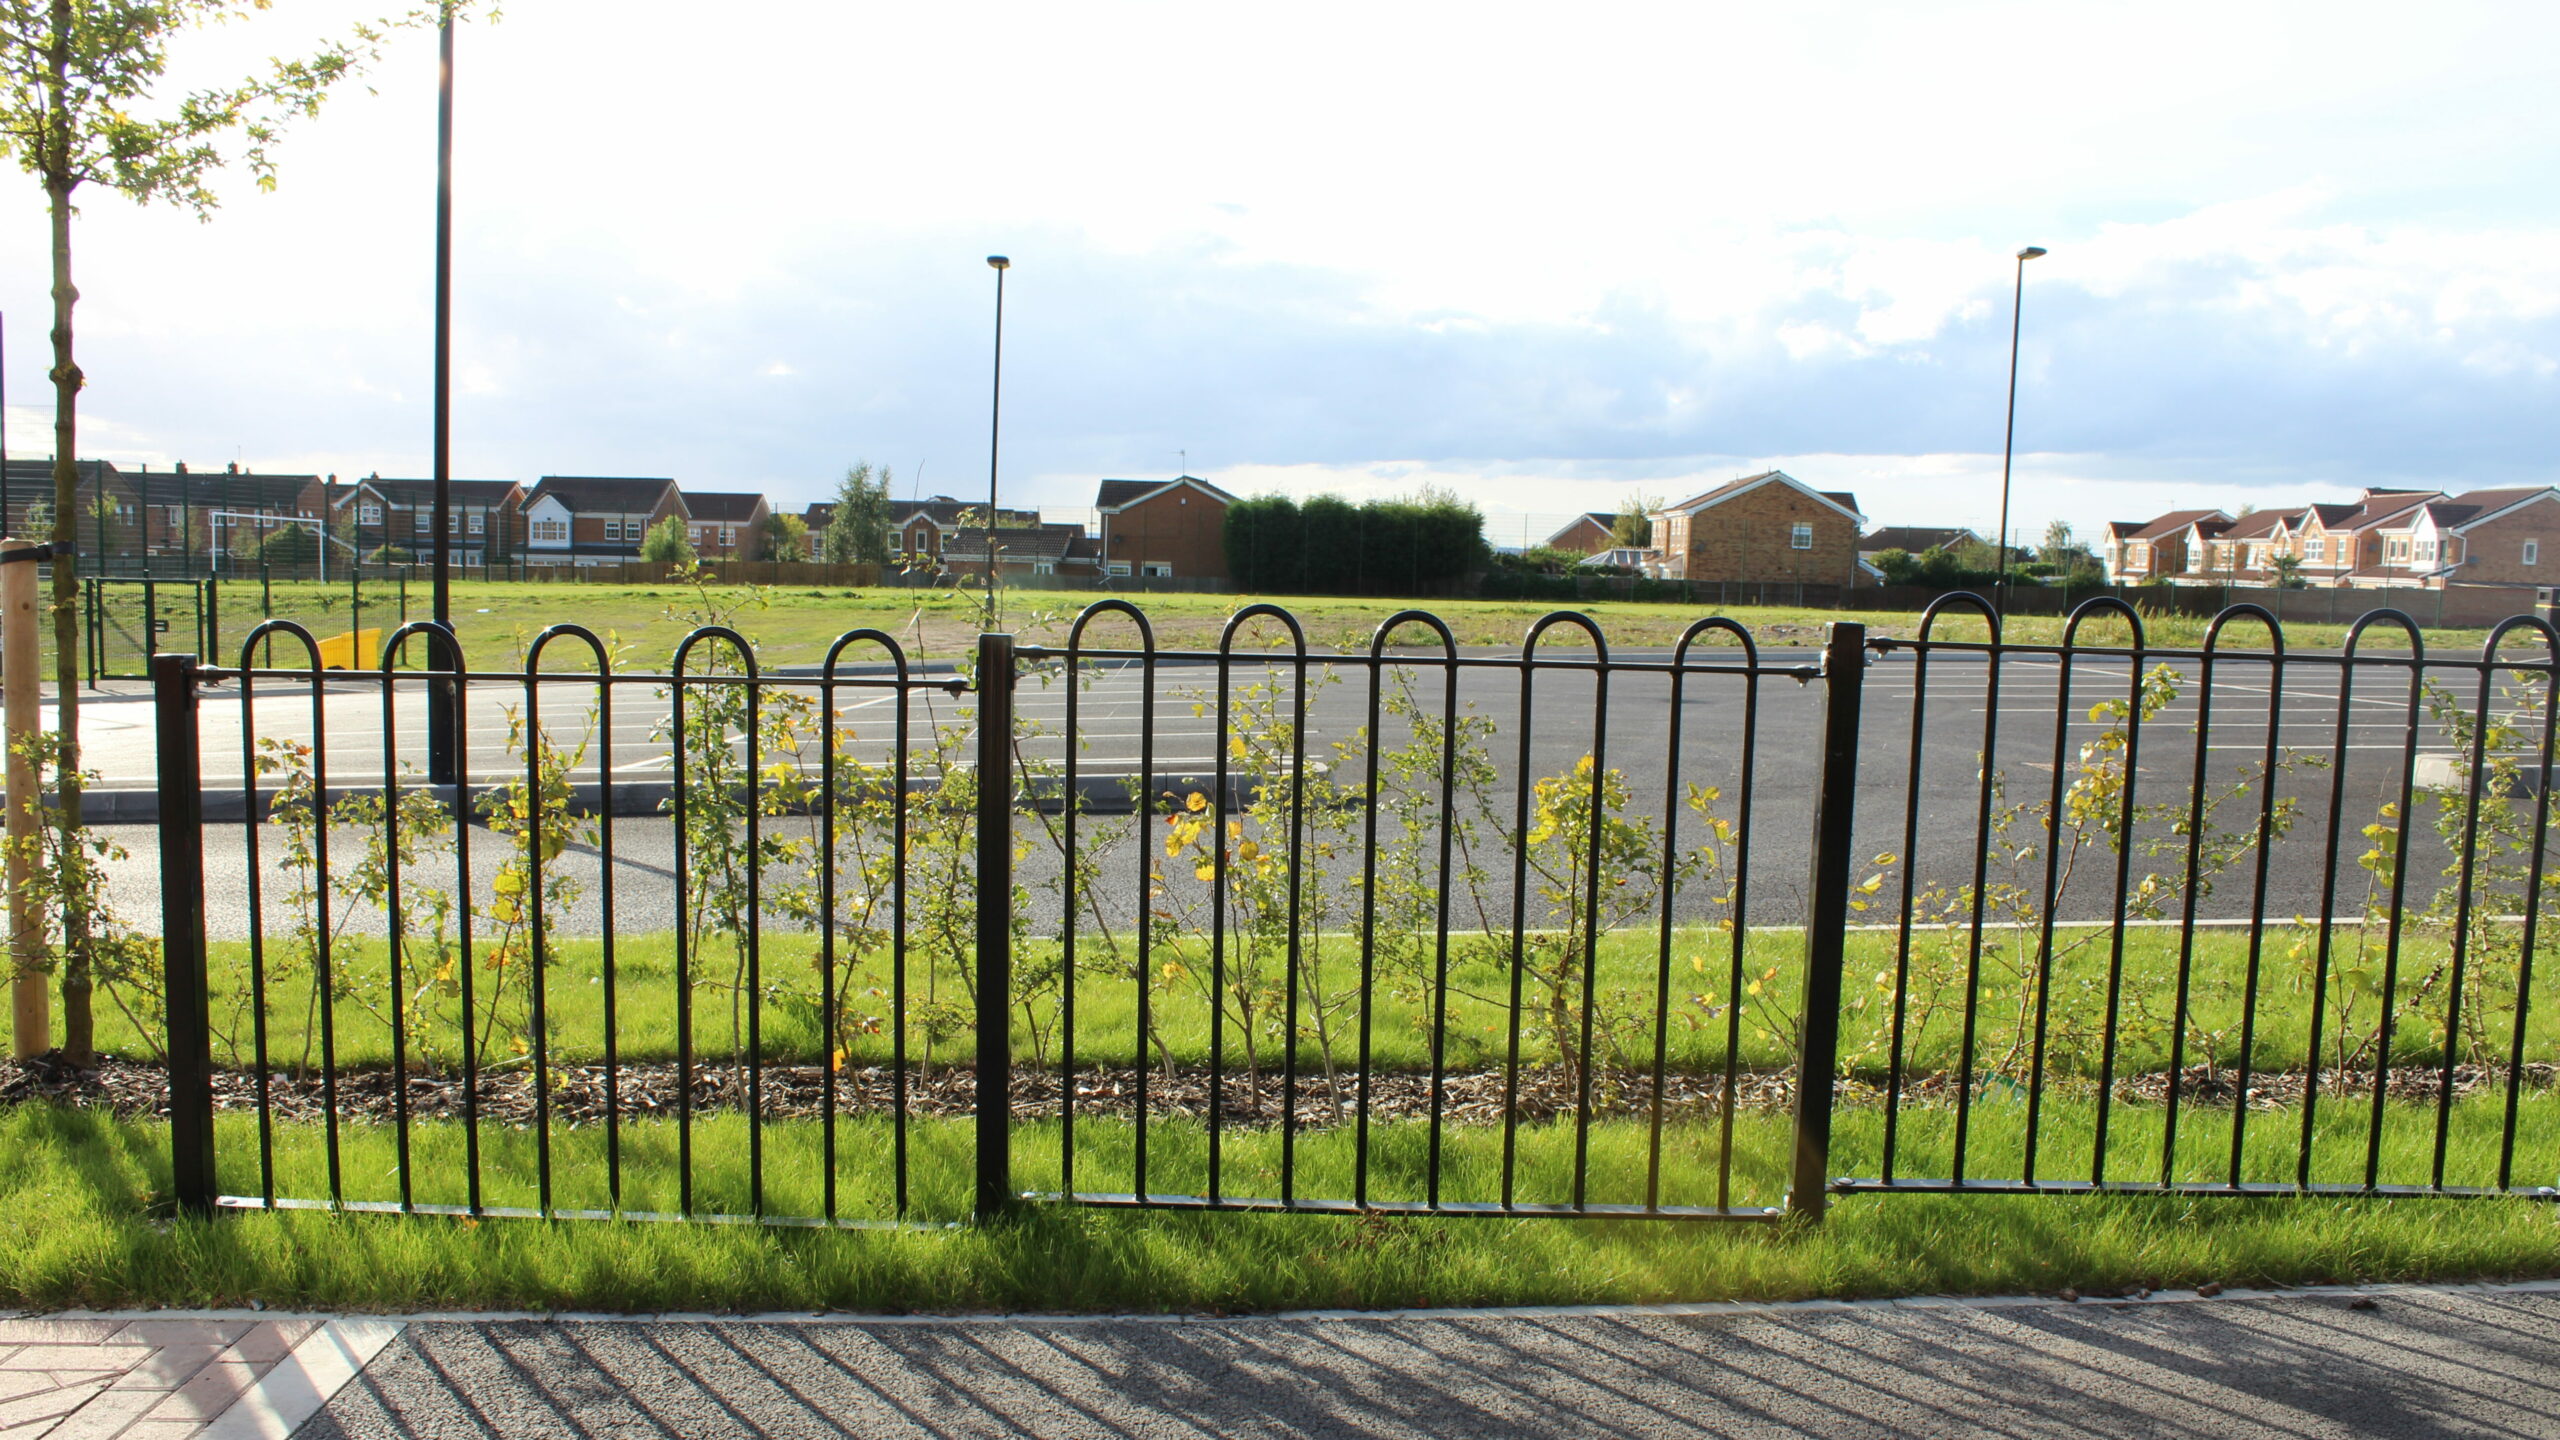 Bow top railings installed in front of school parking spaces.